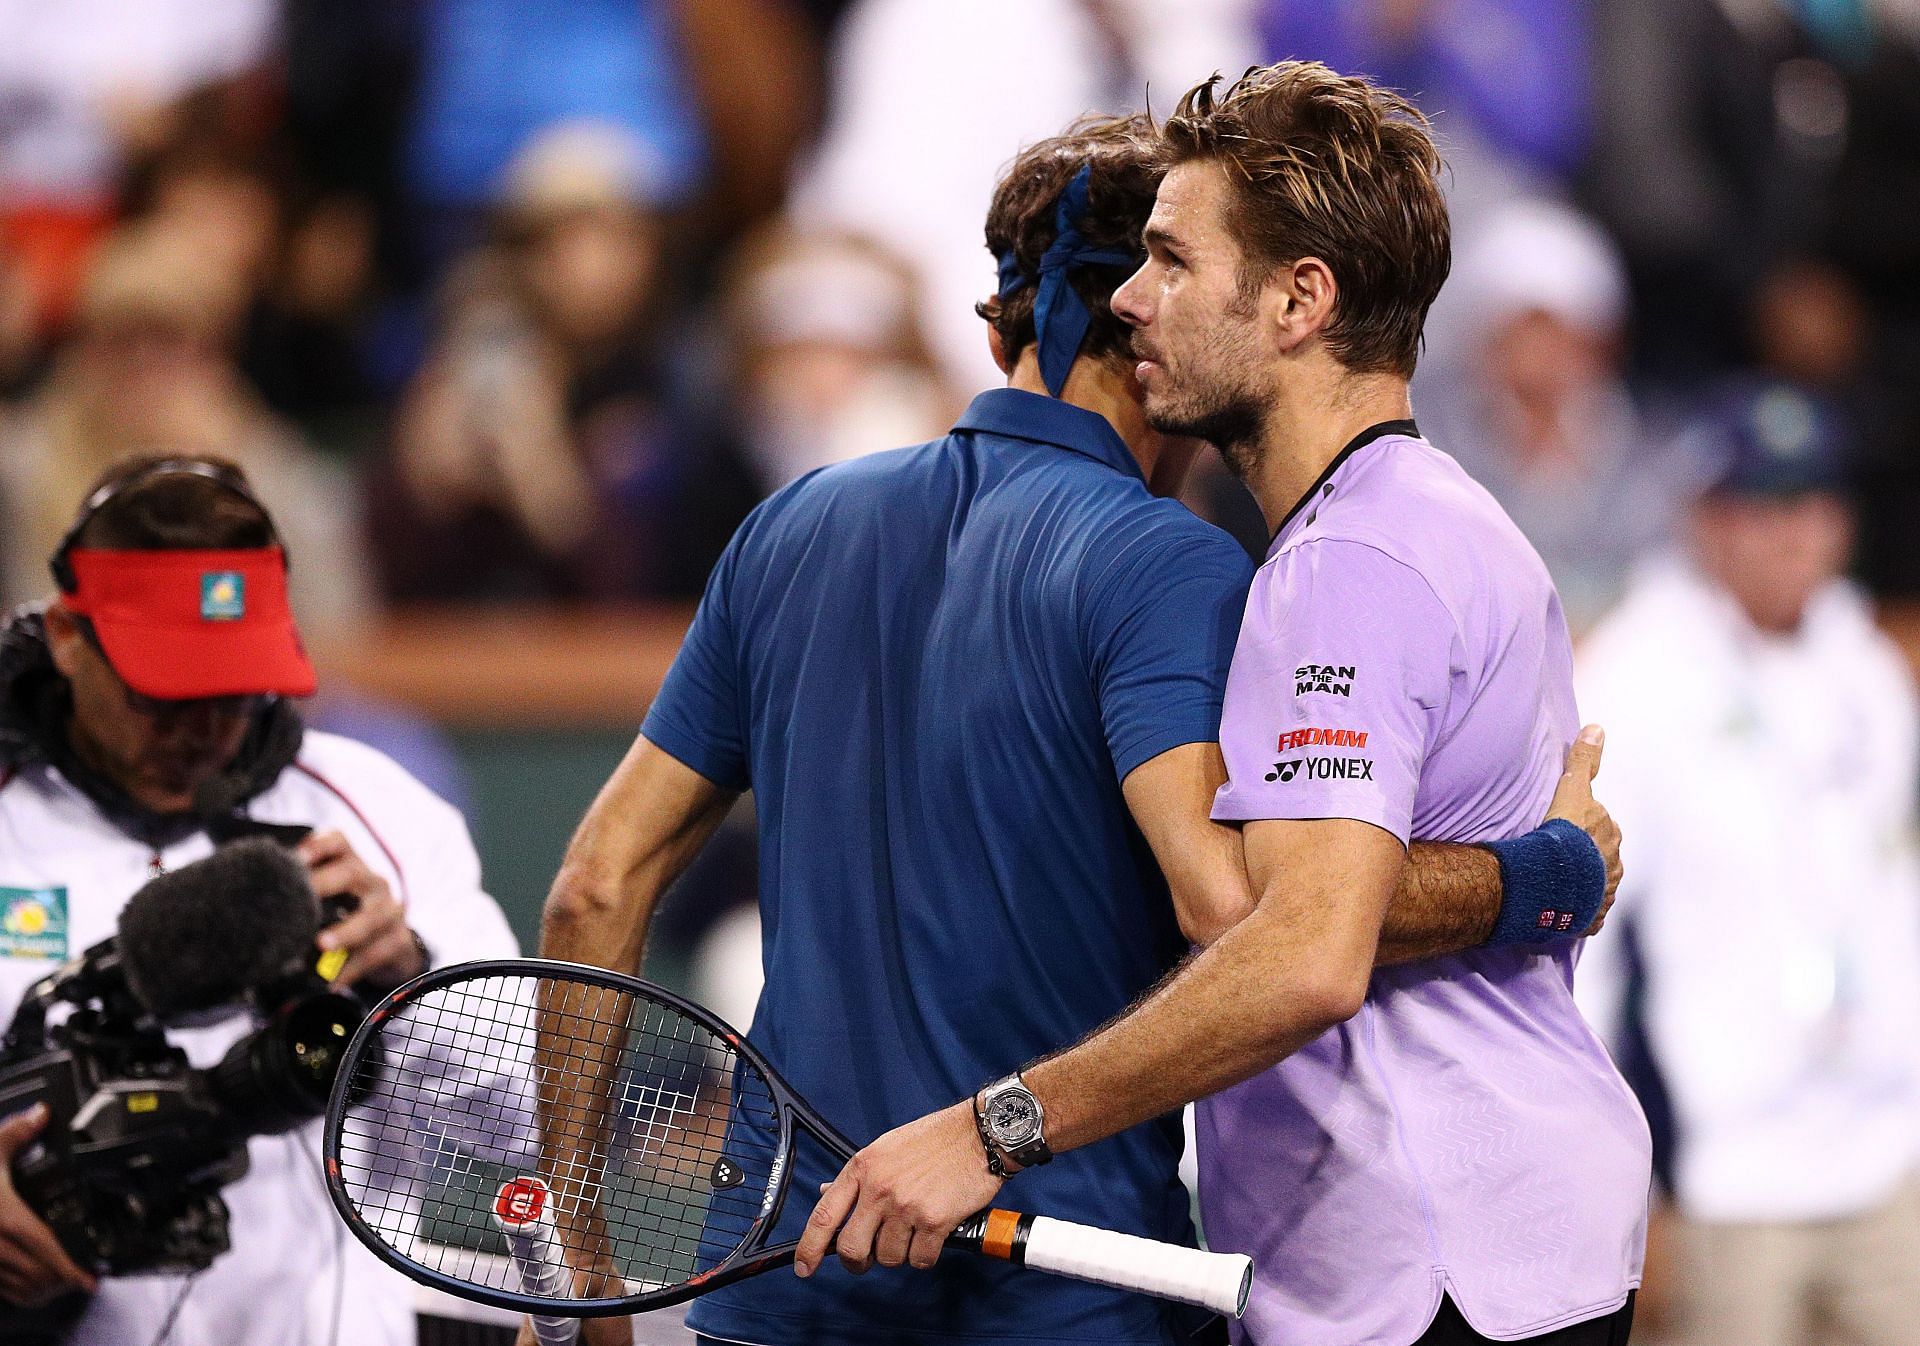 Roger Federer and Stan Wawrinka pictured at the 2019 BNP Paribas Open